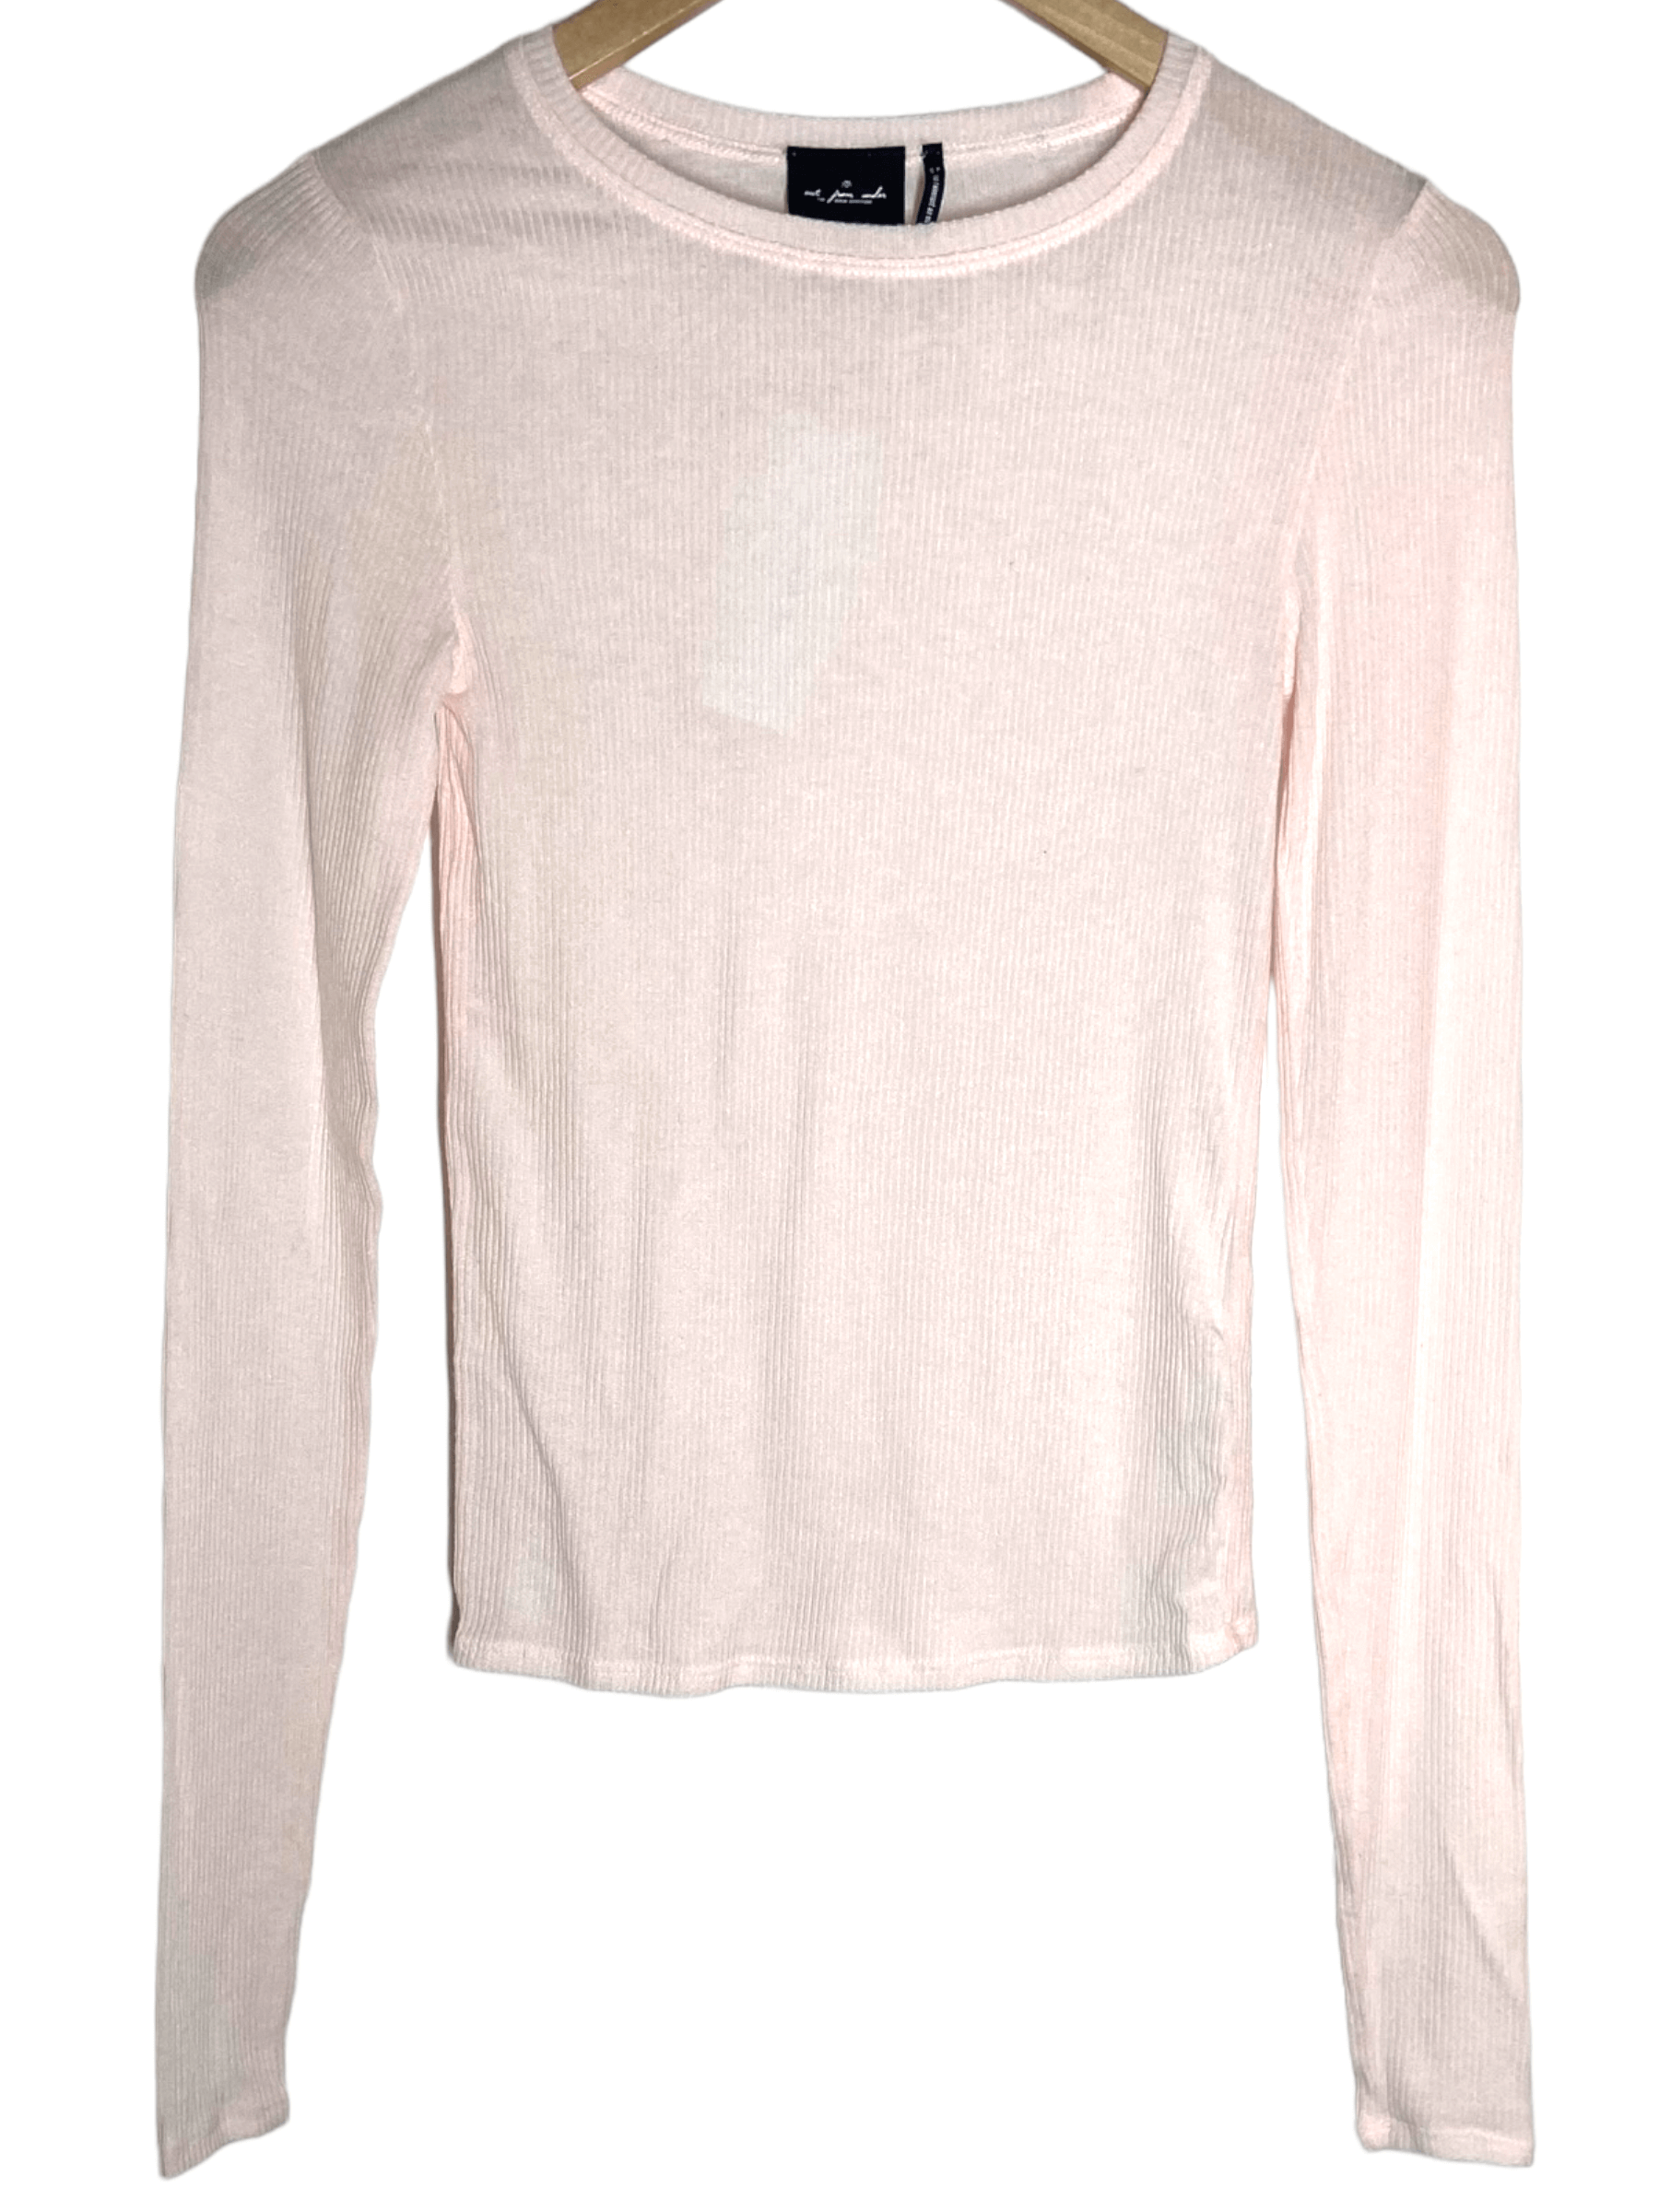 Soft Summer URBAN OUTFITTERS long sleeve knit ribbed top